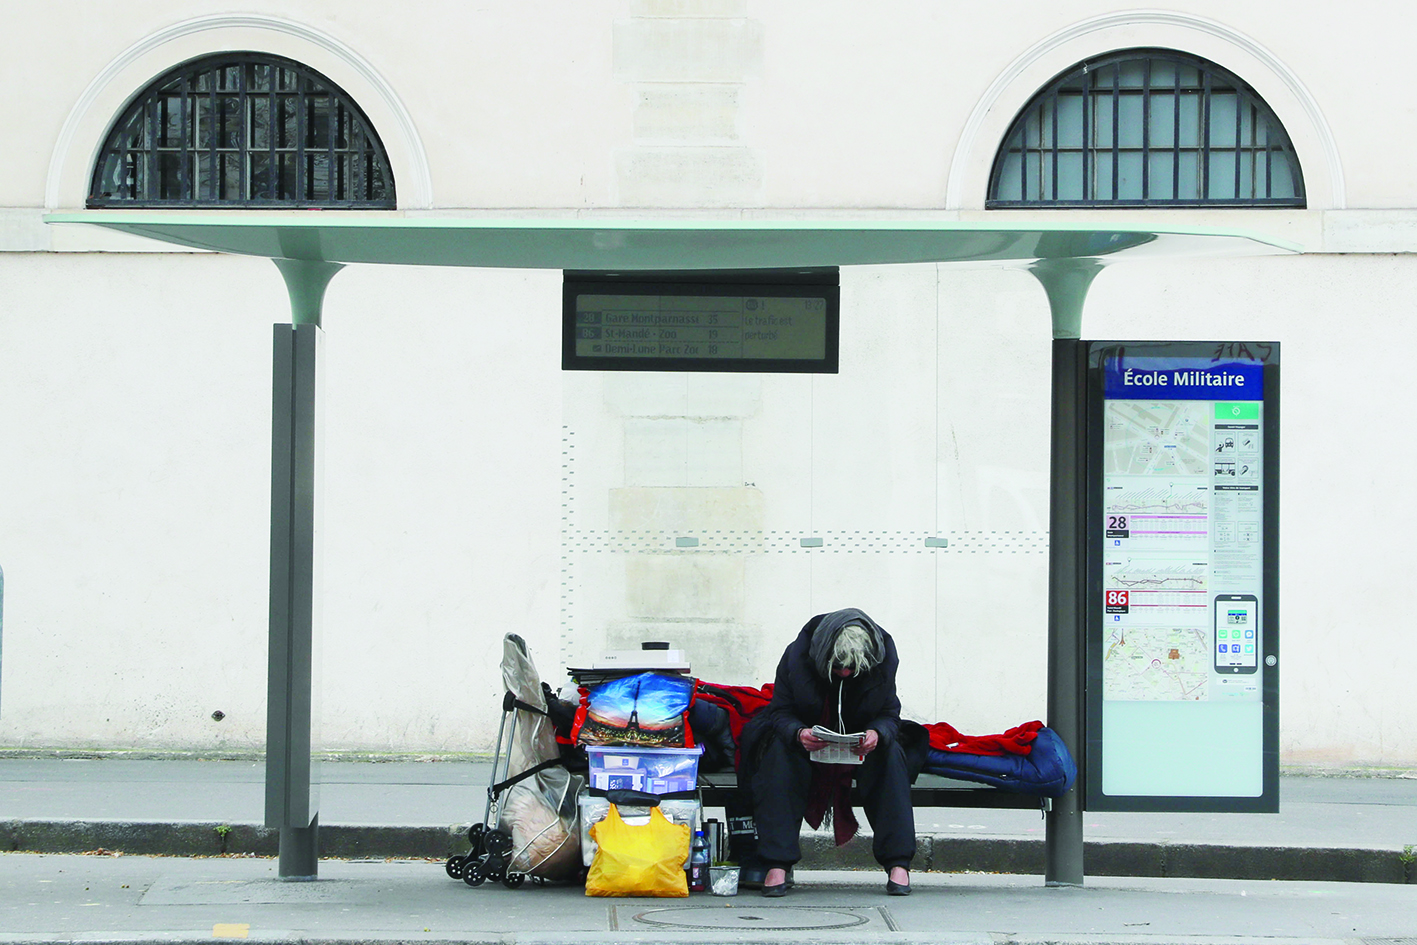 A homeless sits at a bus stop on march 22, 2020, in Paris, as a strict lockdown comes into effect to stop spread of the COVID-19 caused by novel coronavirus in the country prohibiting all but essential outings in a bid to curb coronavirus spread. (Photo by Ludovic MARIN / AFP)